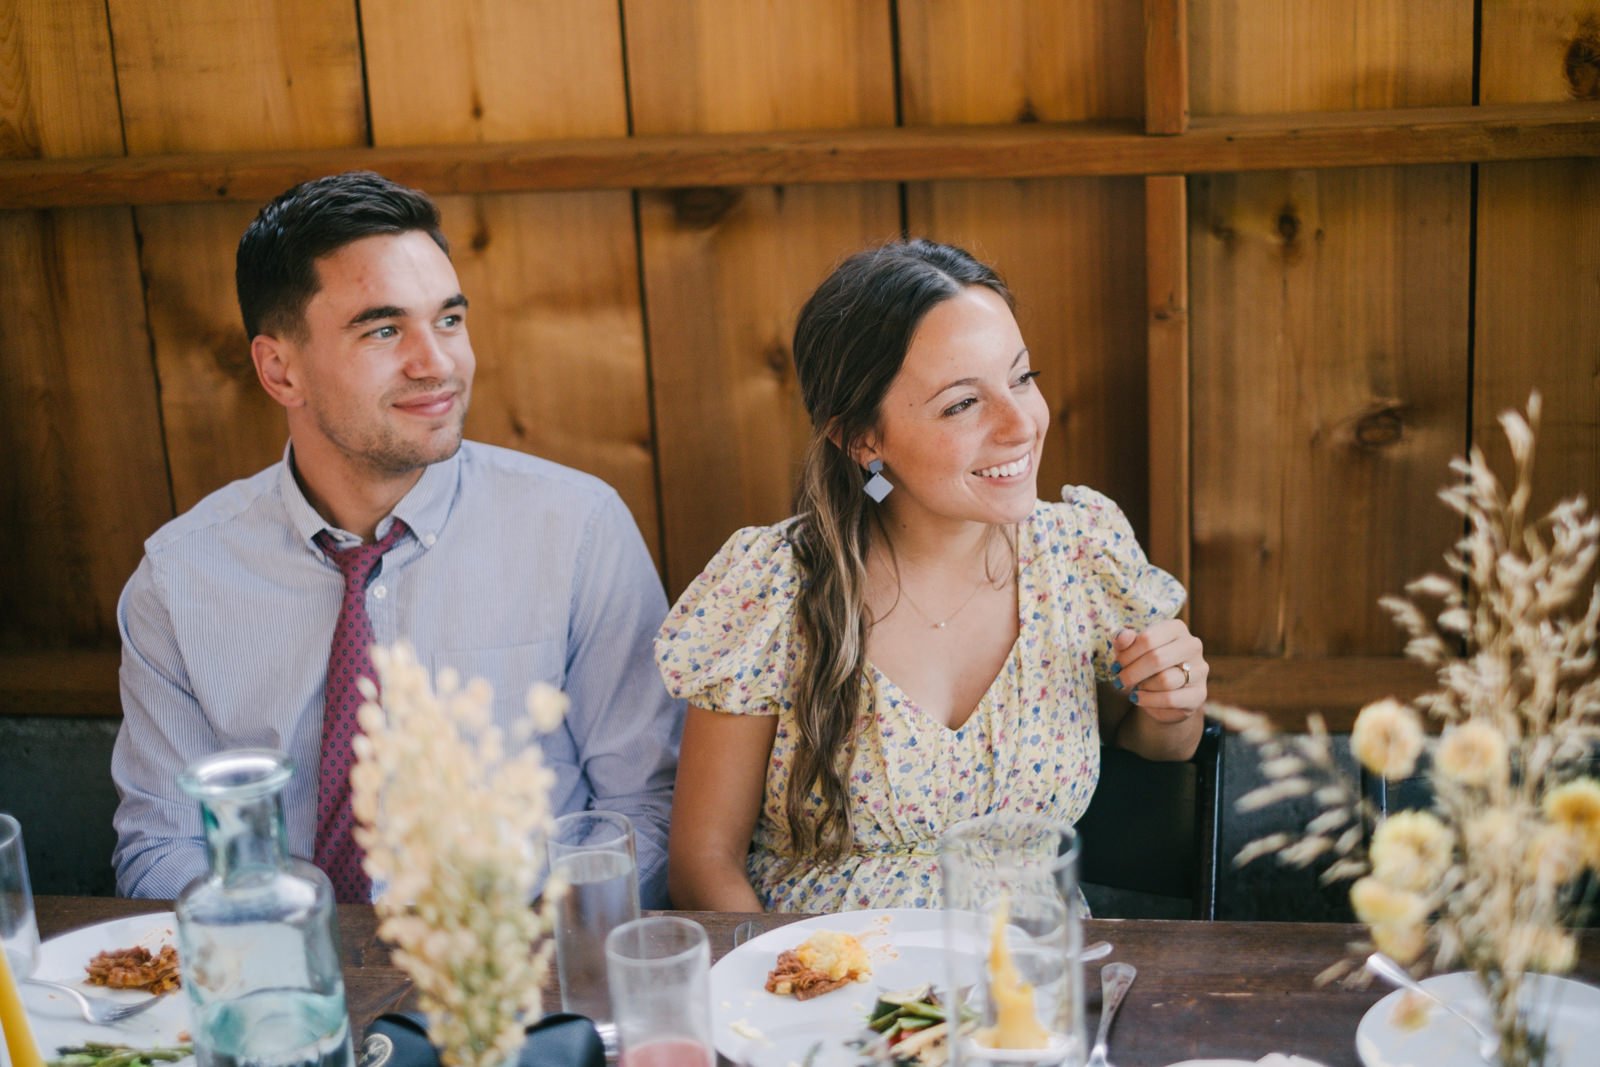  Wedding guests laugh at dinner table 